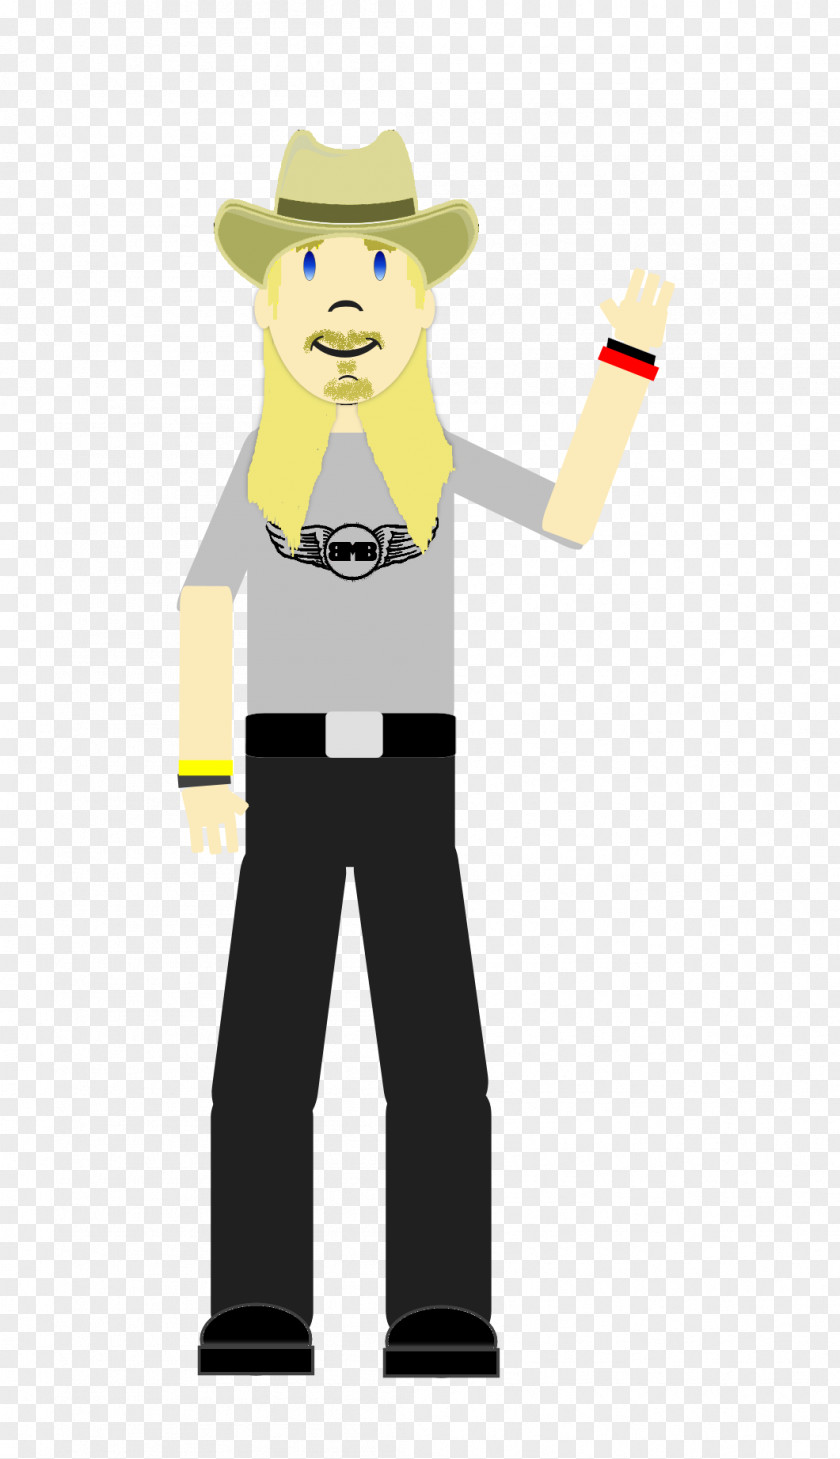 Bret Michaels Without Wig Illustration Cartoon Physician Human Behavior Mascot PNG